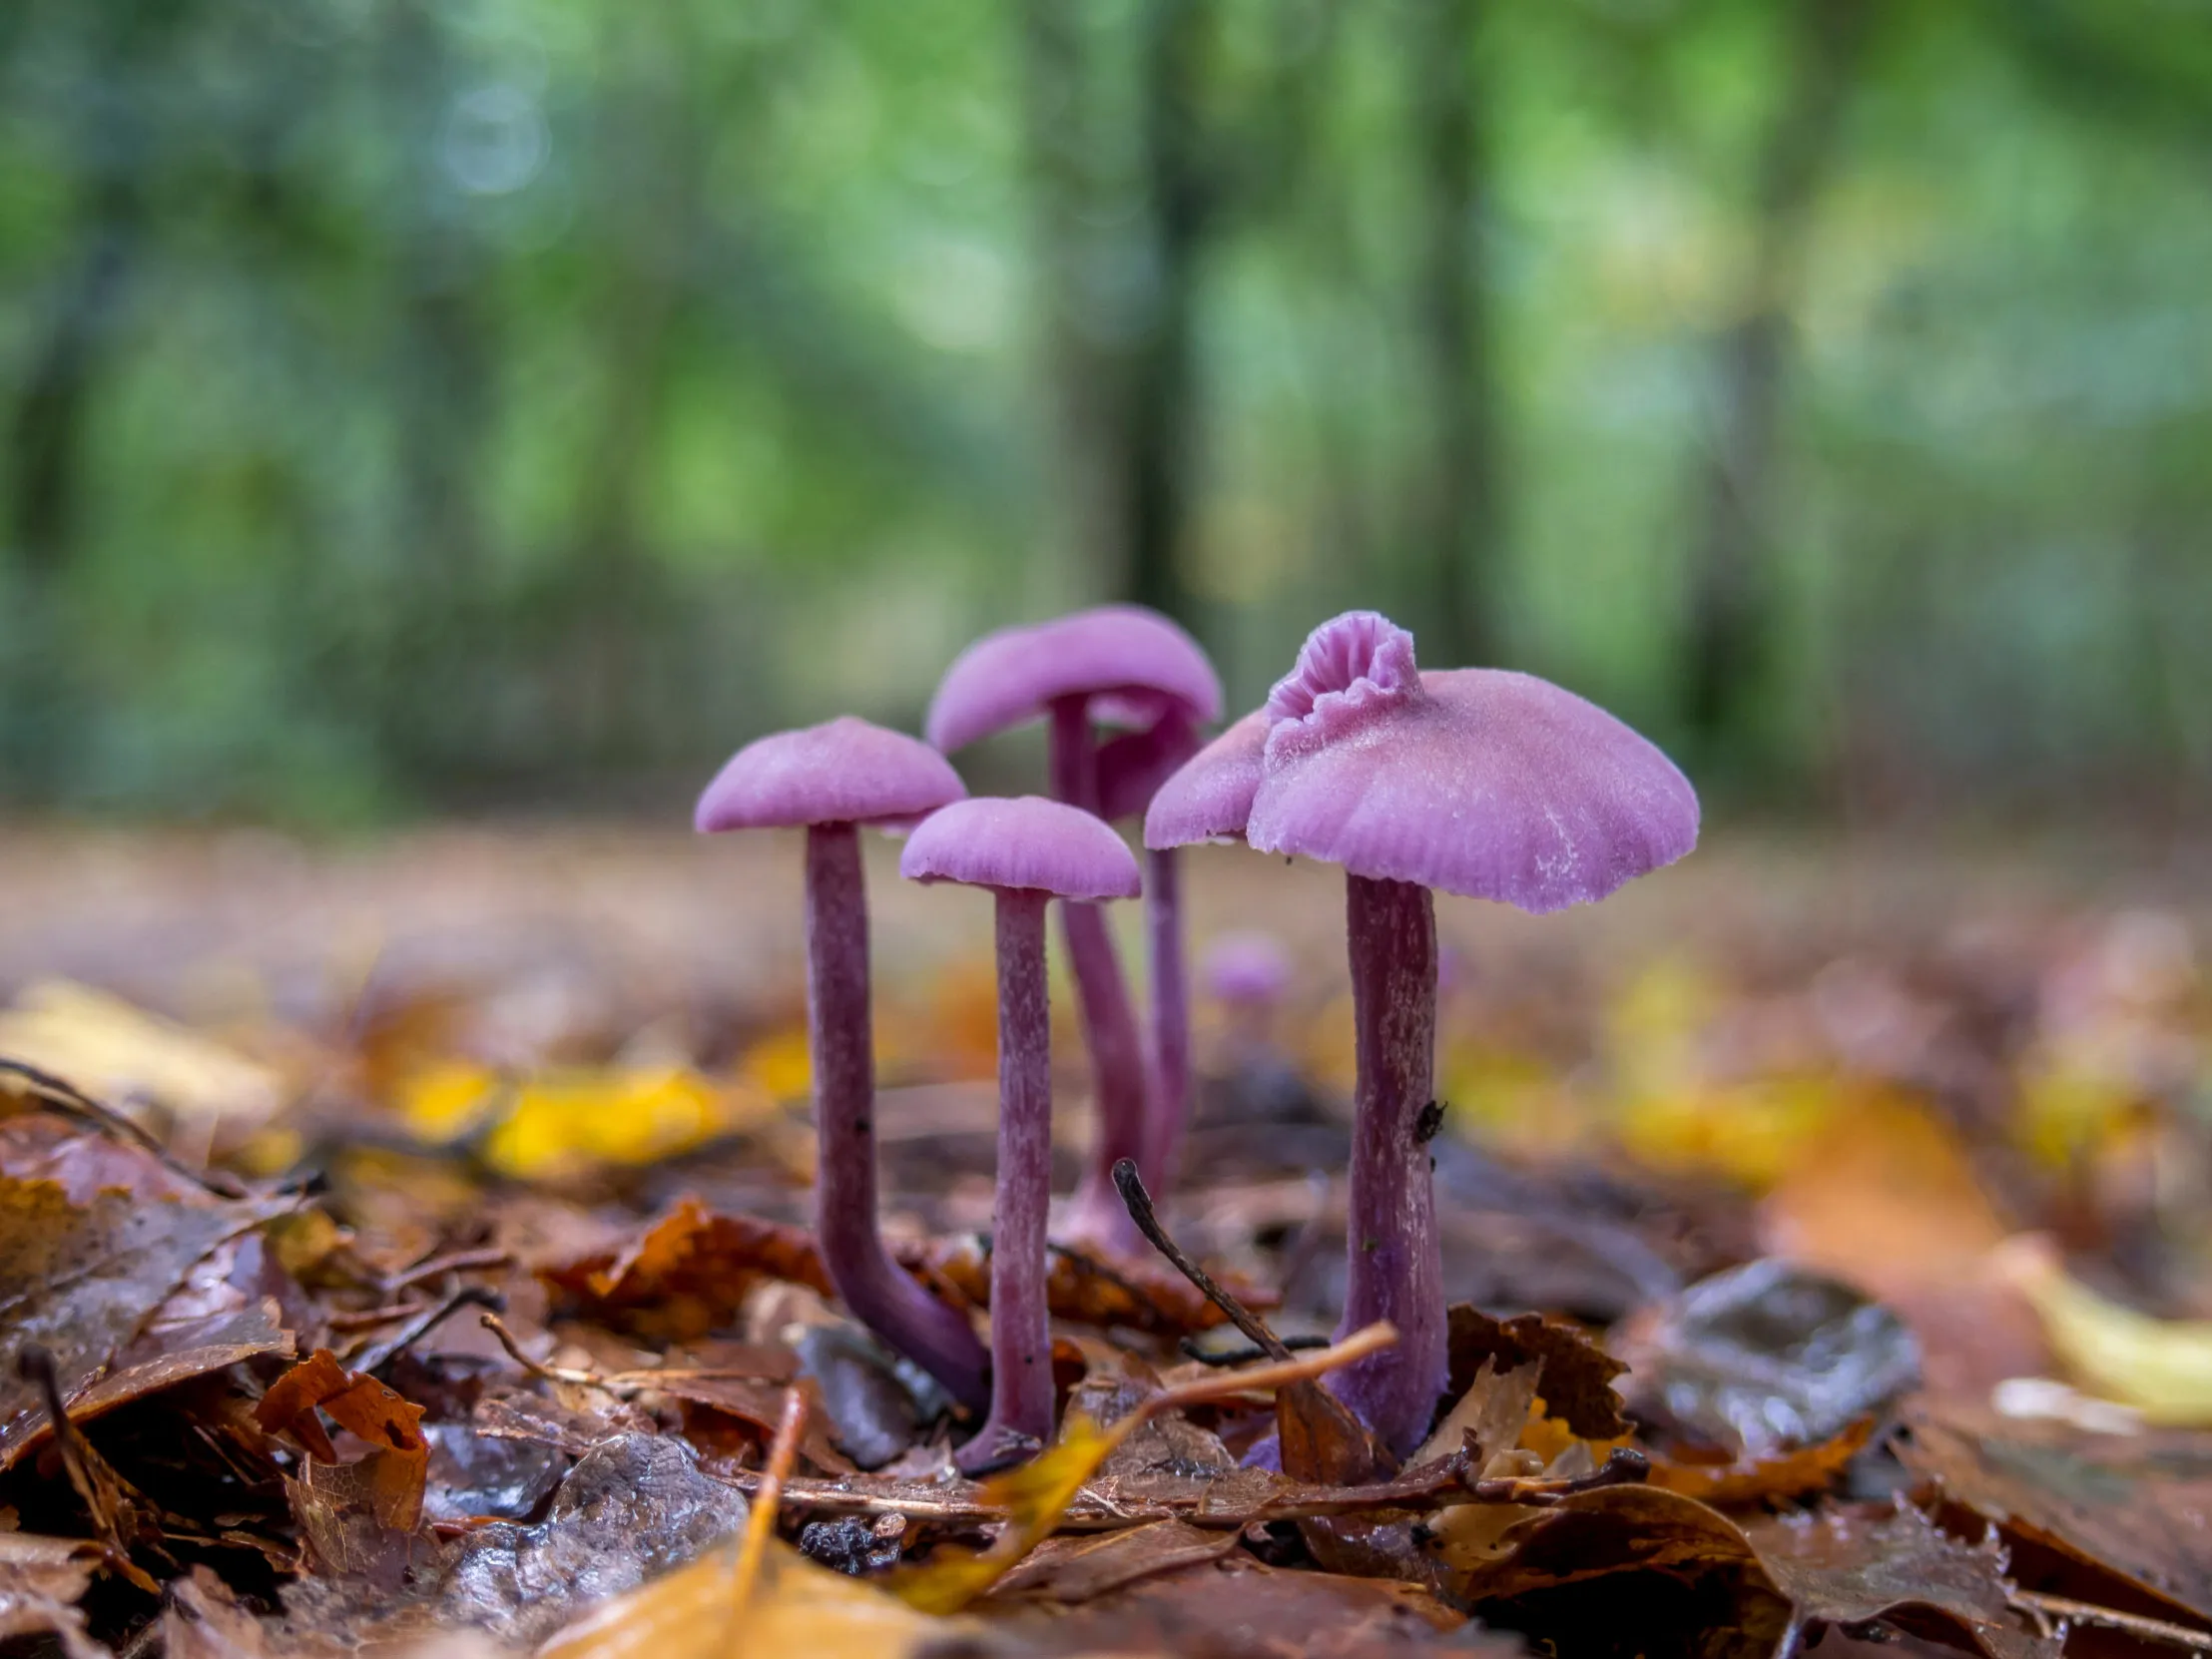 Four Amethyst Deceiver mushrooms protruding from a layer of dead, damp autumn leaves.